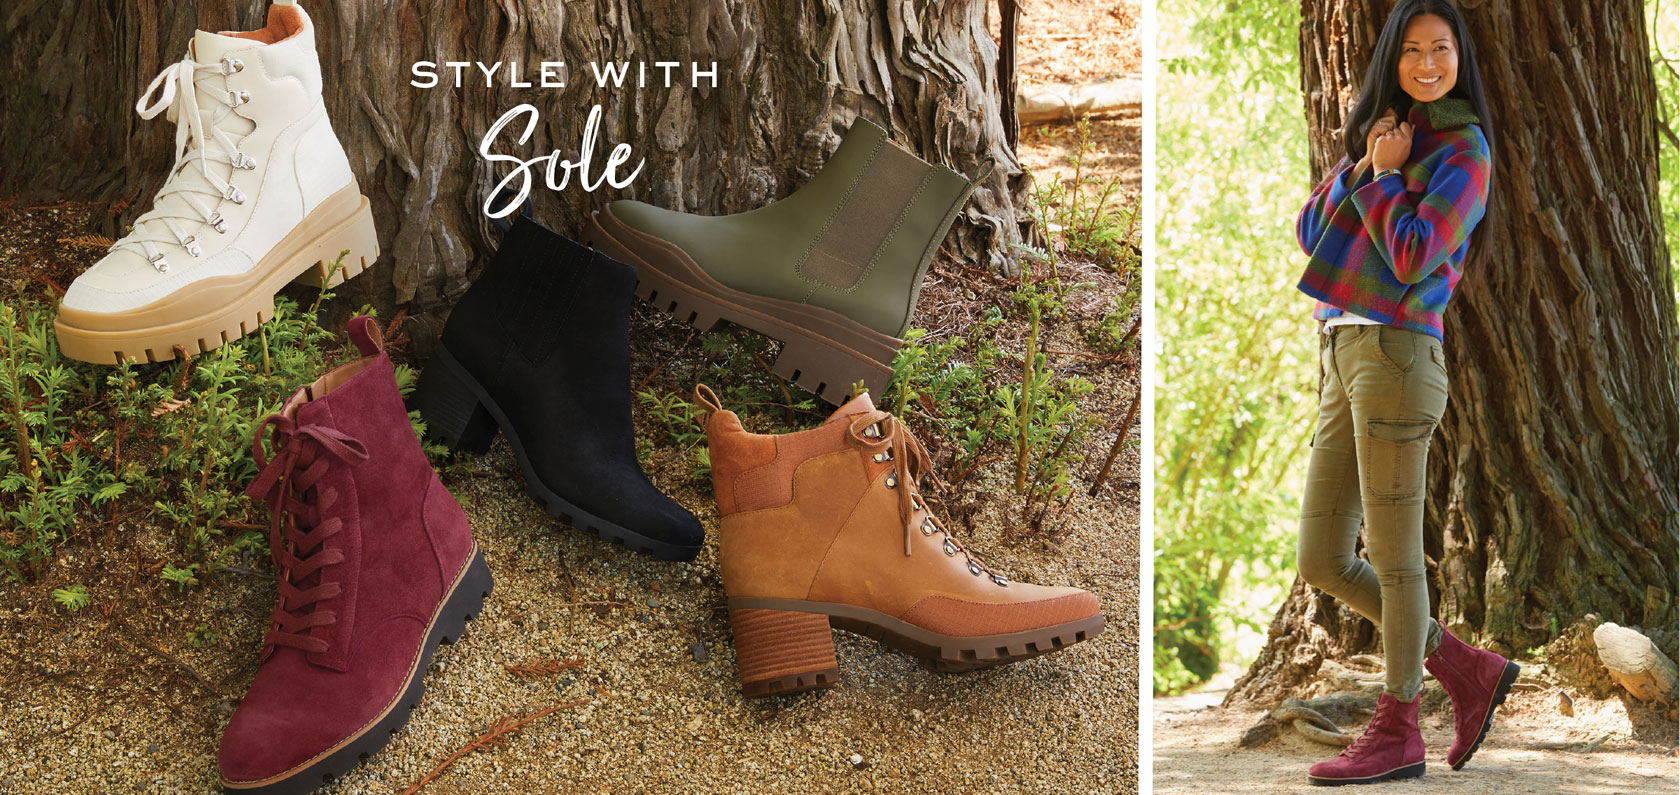 Style With Sole - Women's Lug Boots